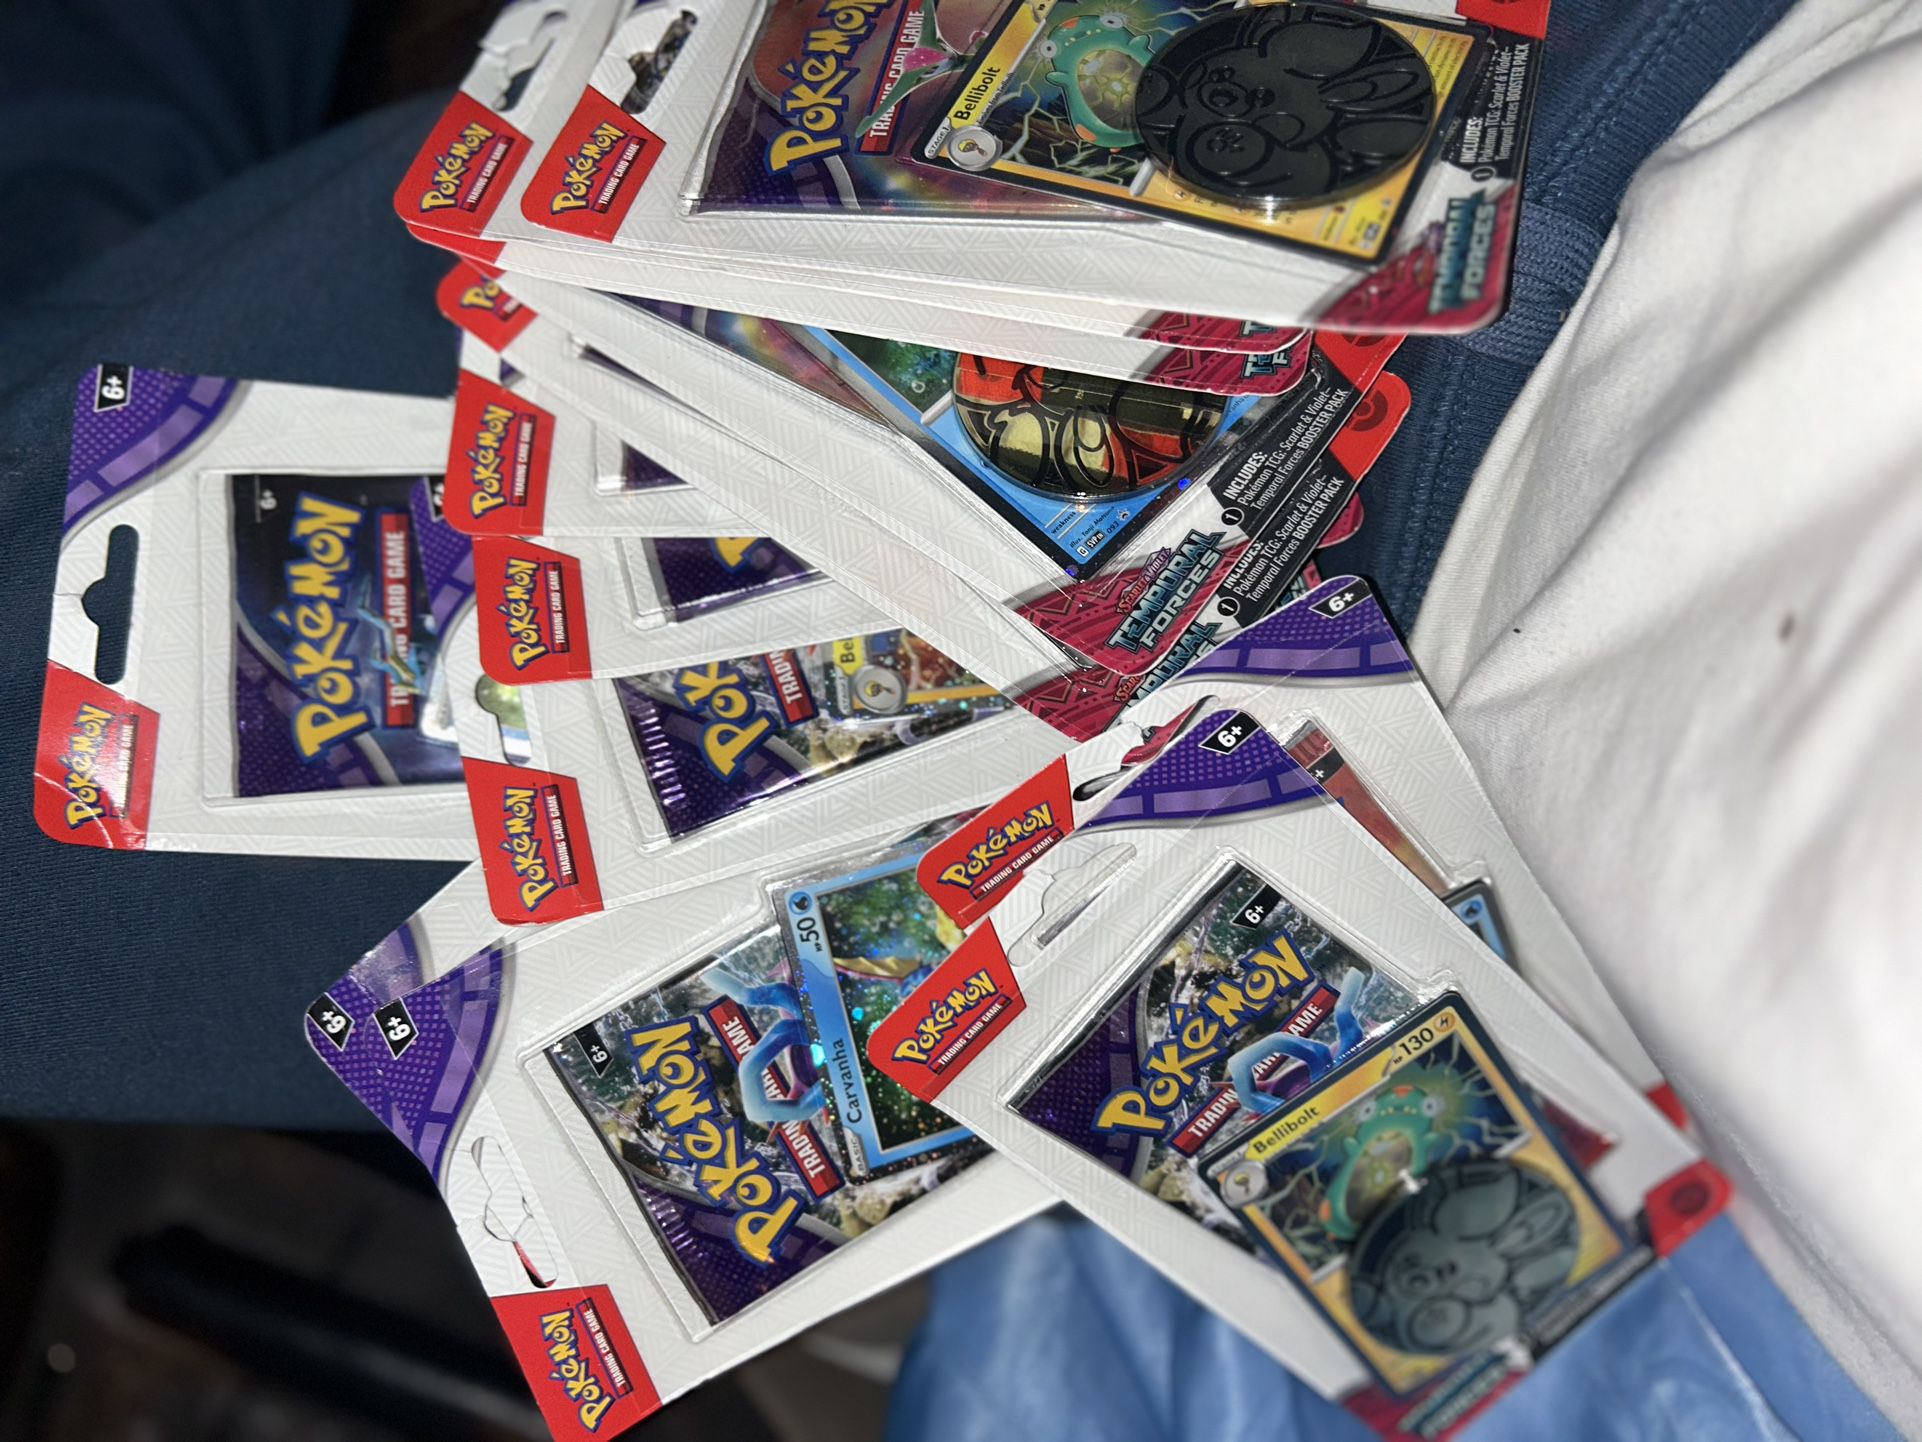 Offer Pokémon Cards Need Gone Now